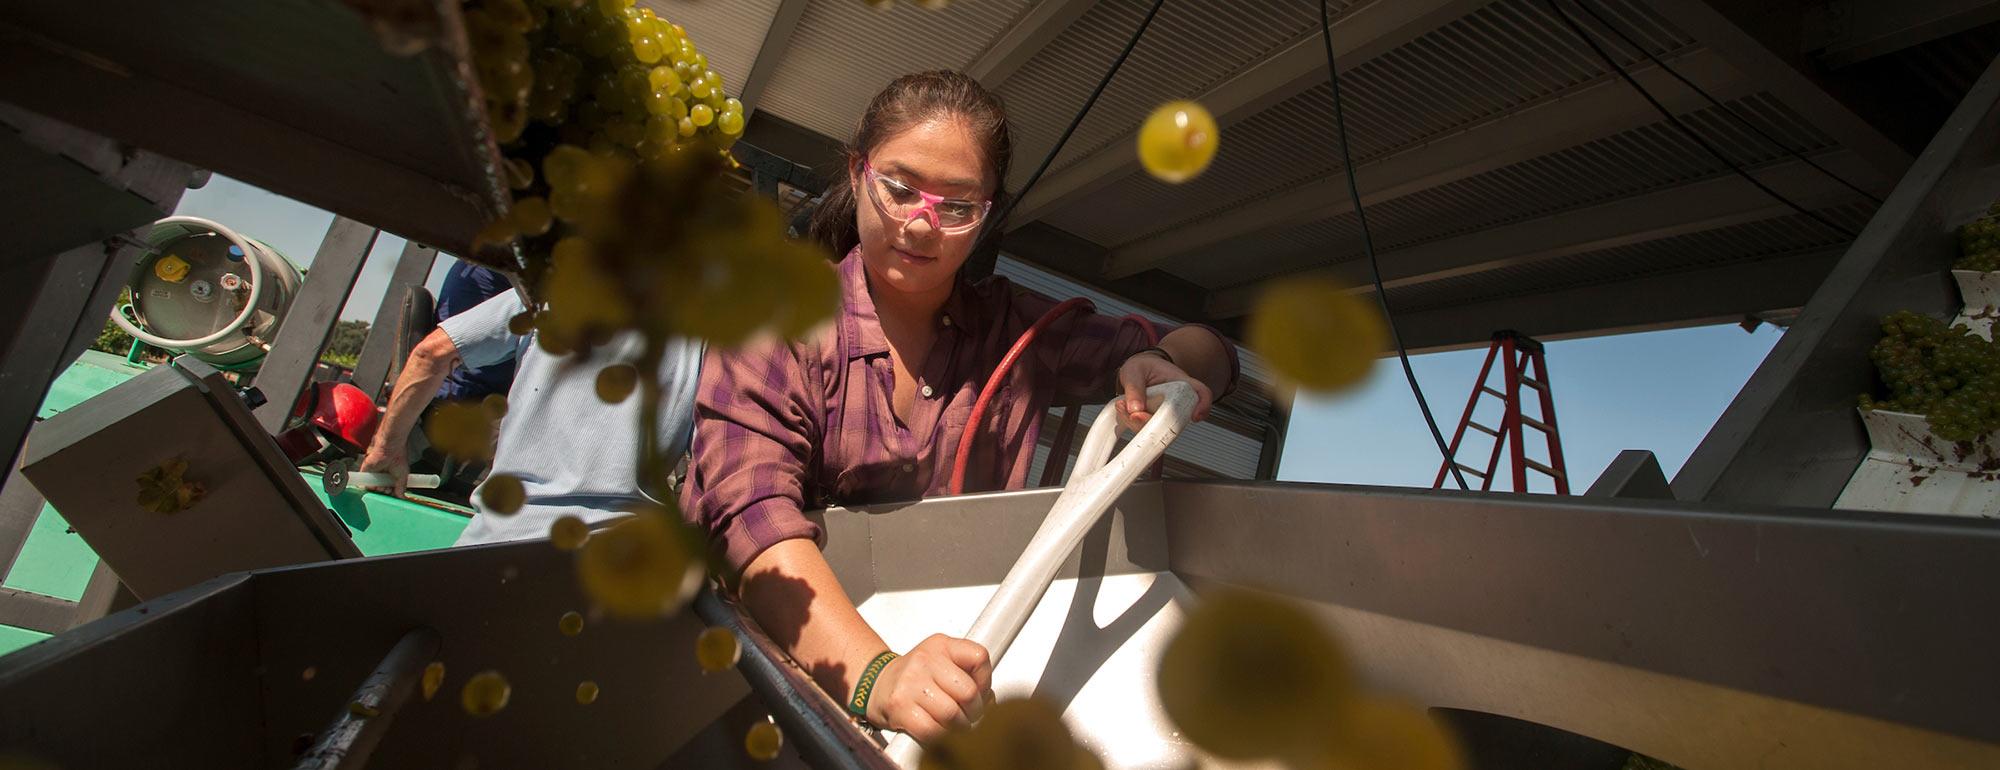 A female student sorts grapes into a large machine